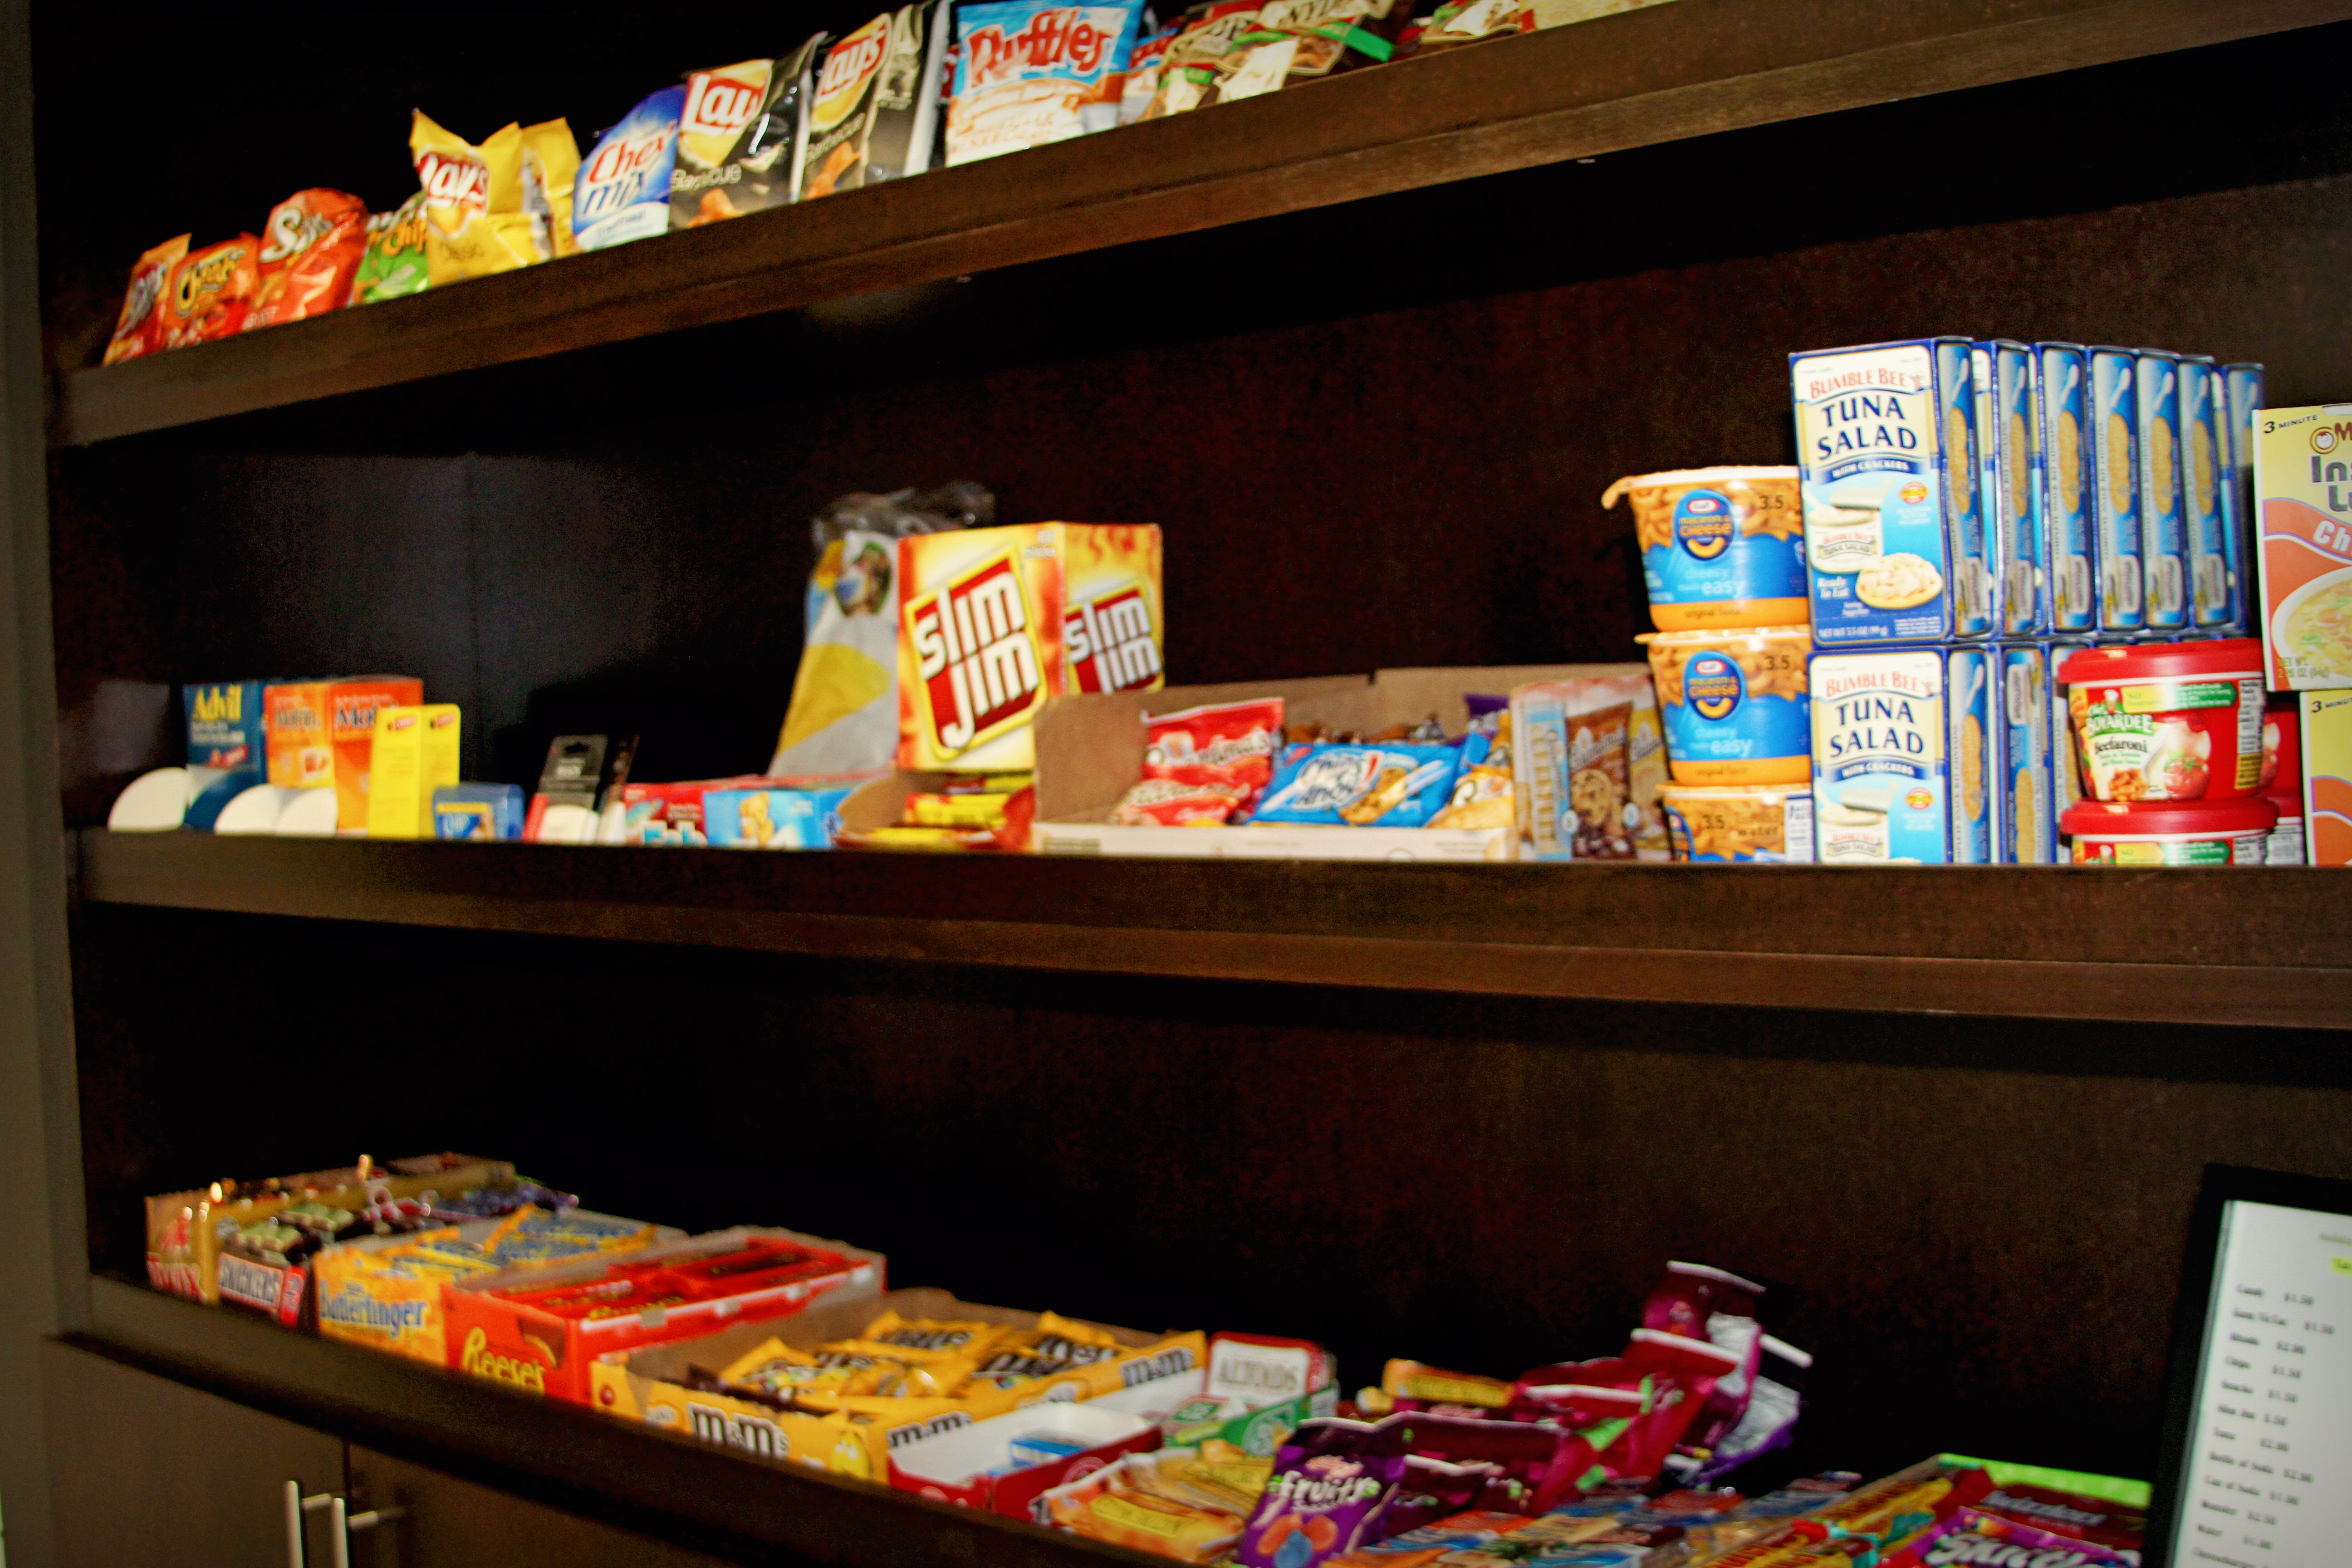 Sundry Shop with everything you shall need to snack on